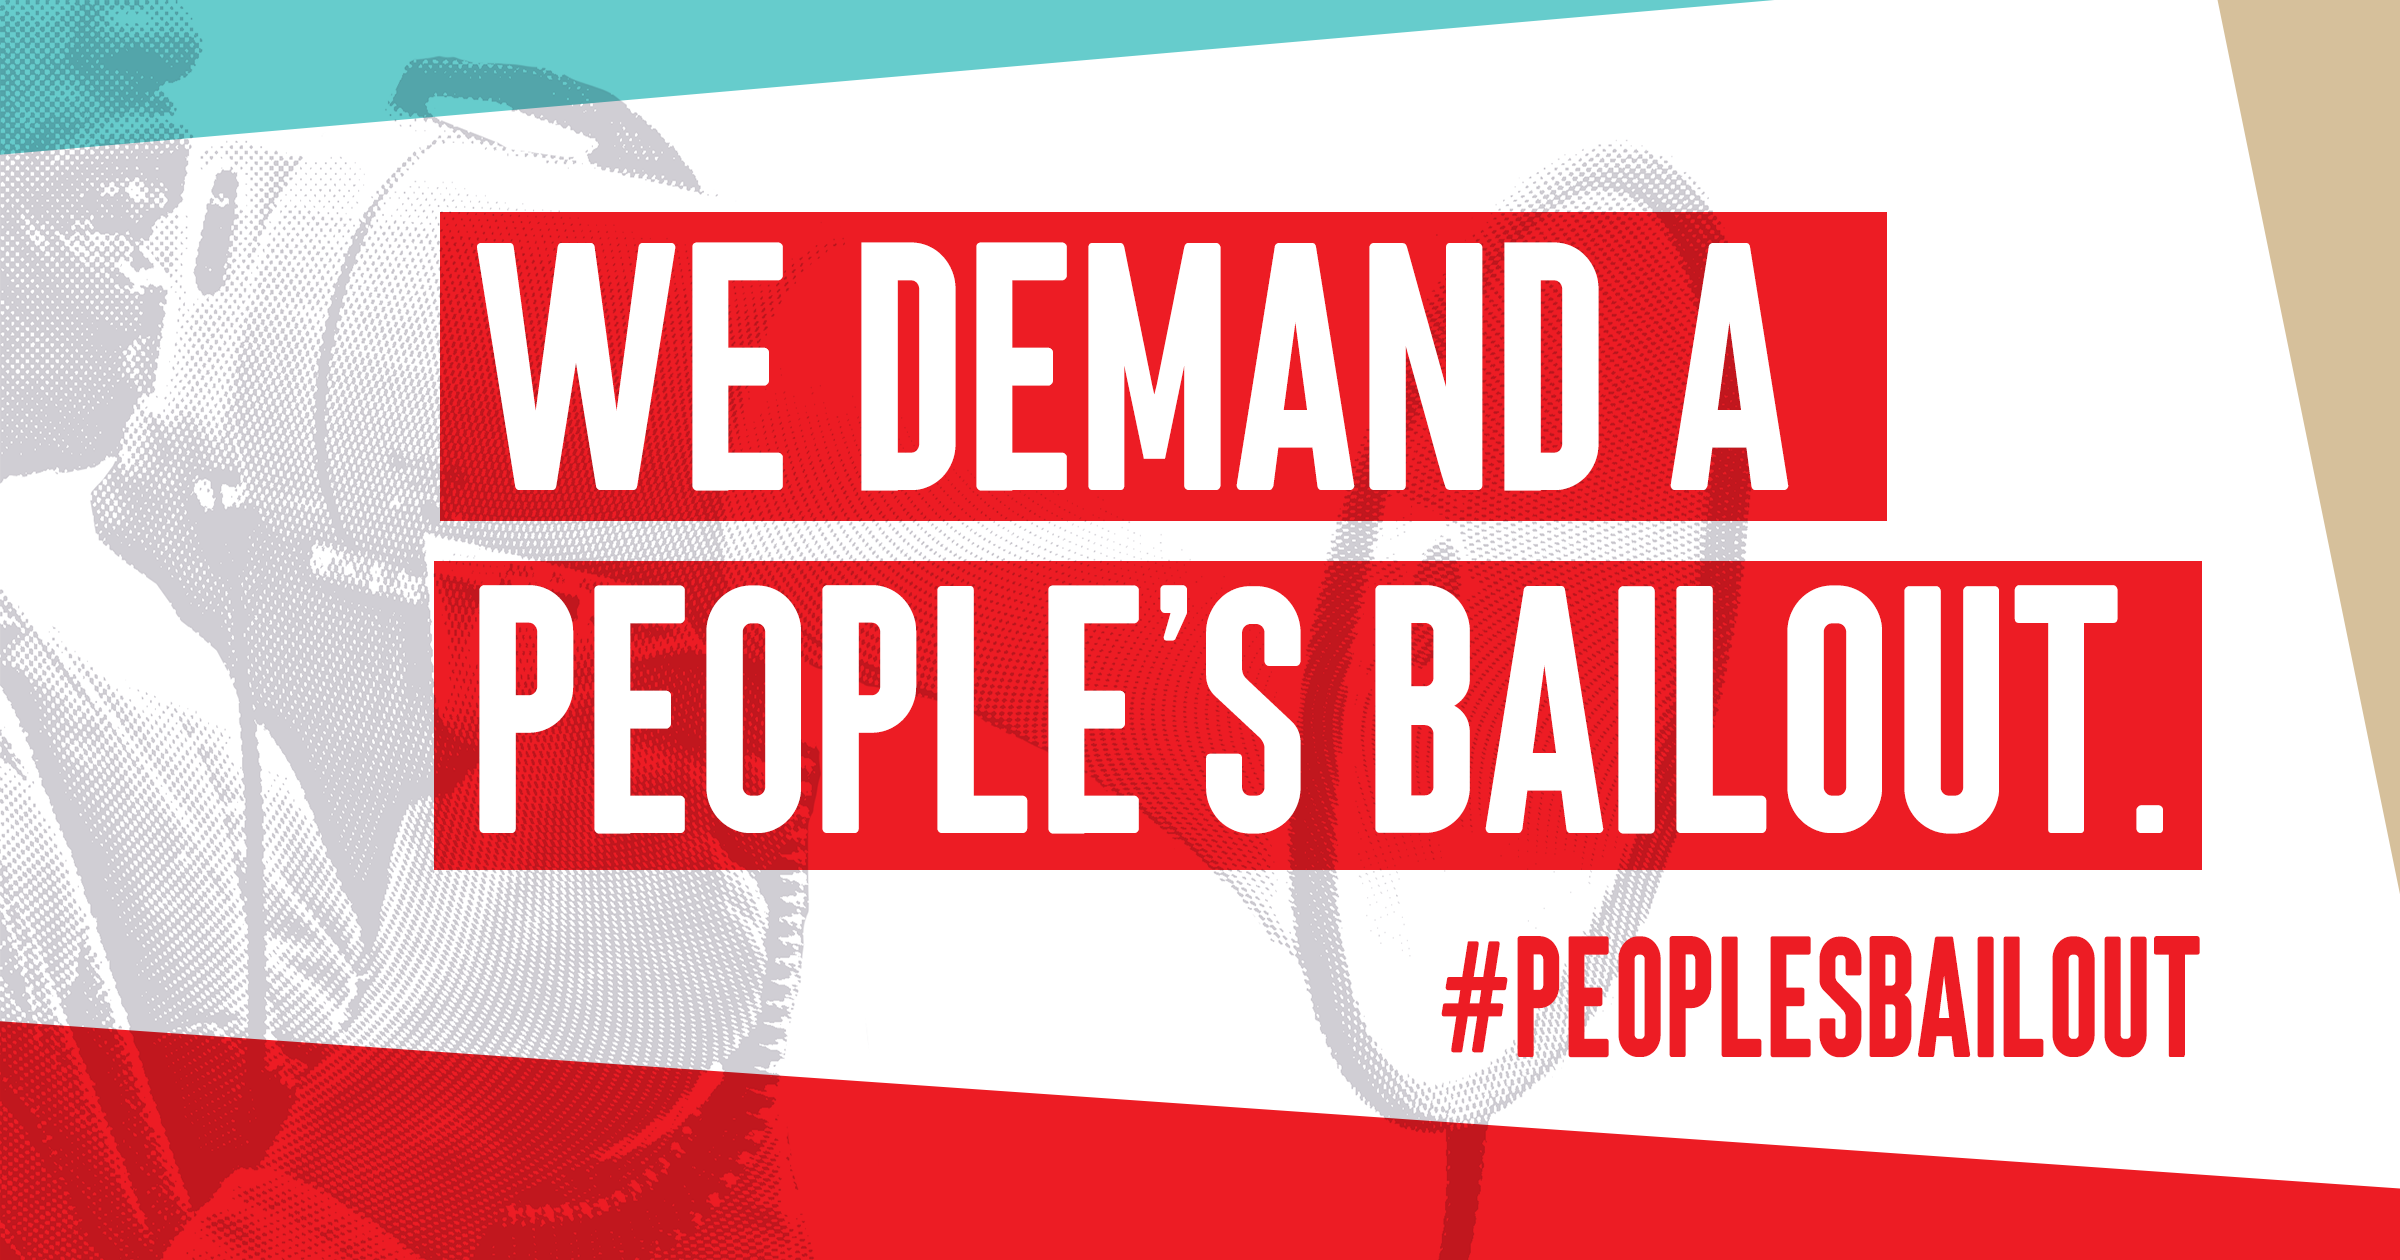 "We Demand a People's Bailout."